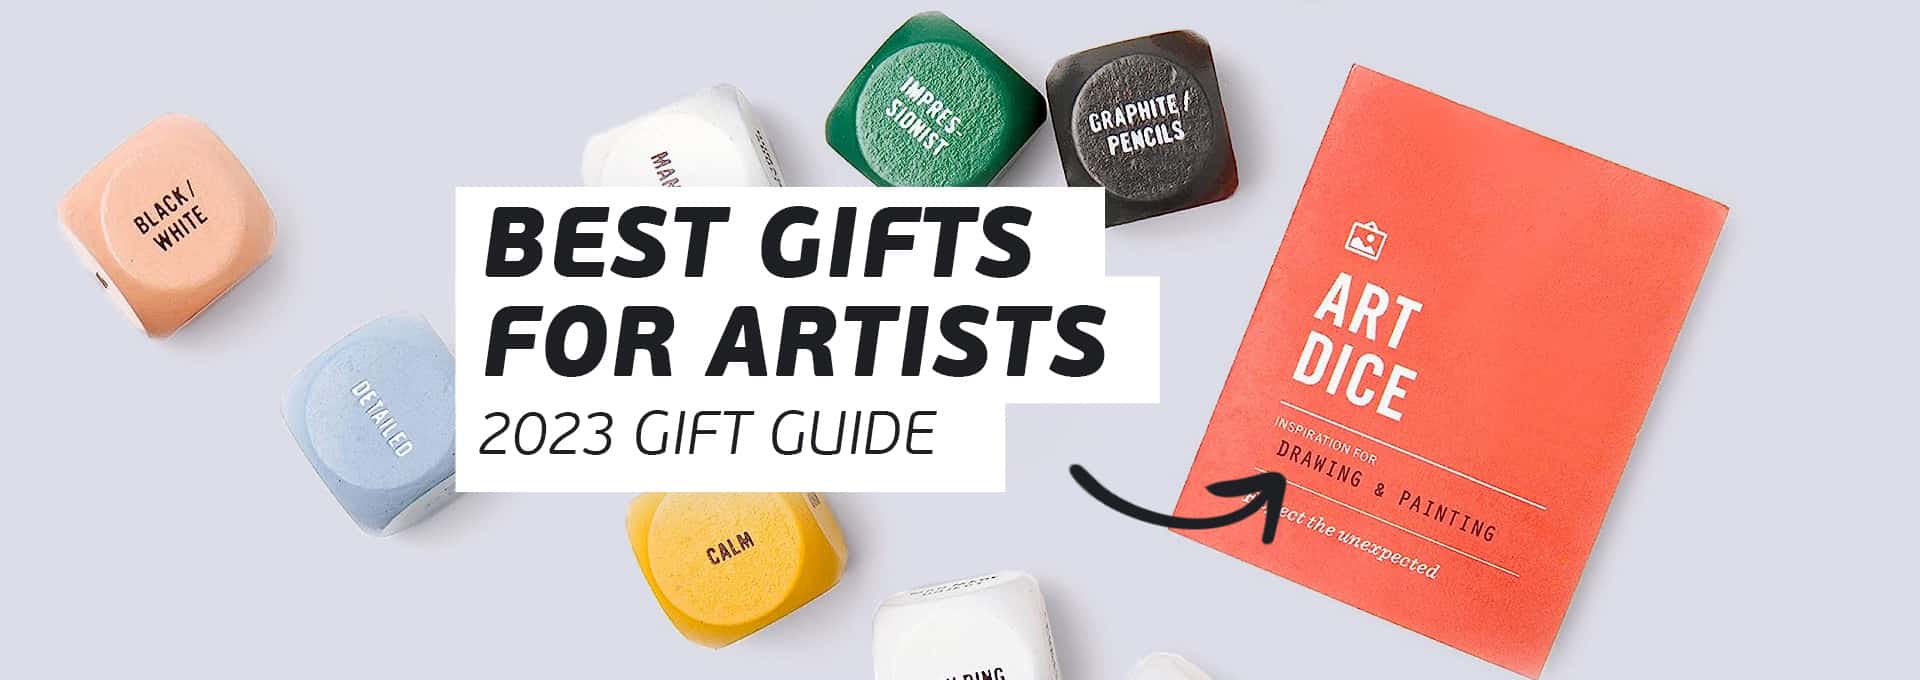 Favorite Holiday Art Gifts - Drawing